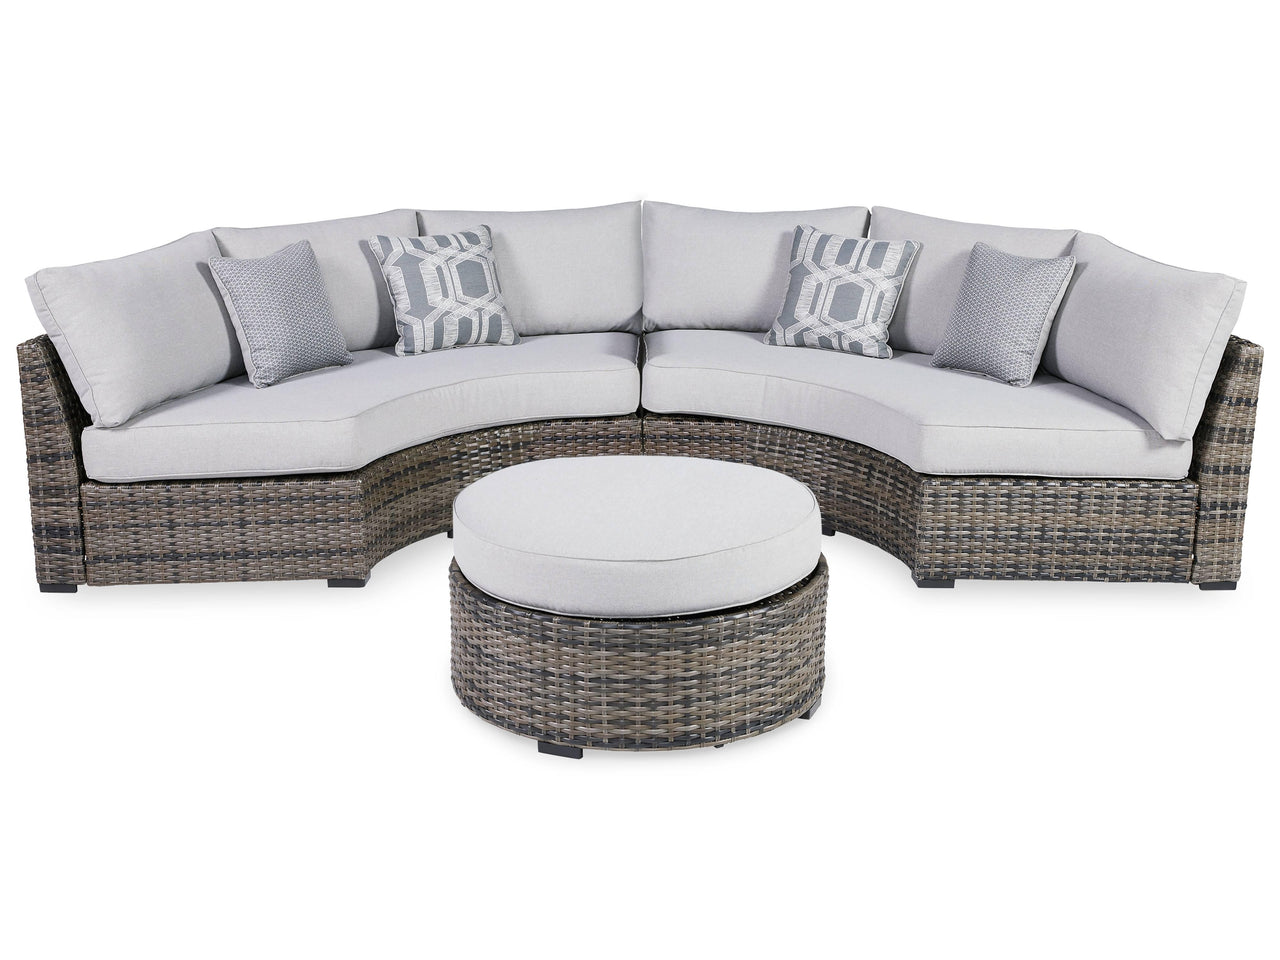 Harbor Court - Dark Gray - 3 Pc. - Sectional Lounge Set Tony's Home Furnishings Furniture. Beds. Dressers. Sofas.